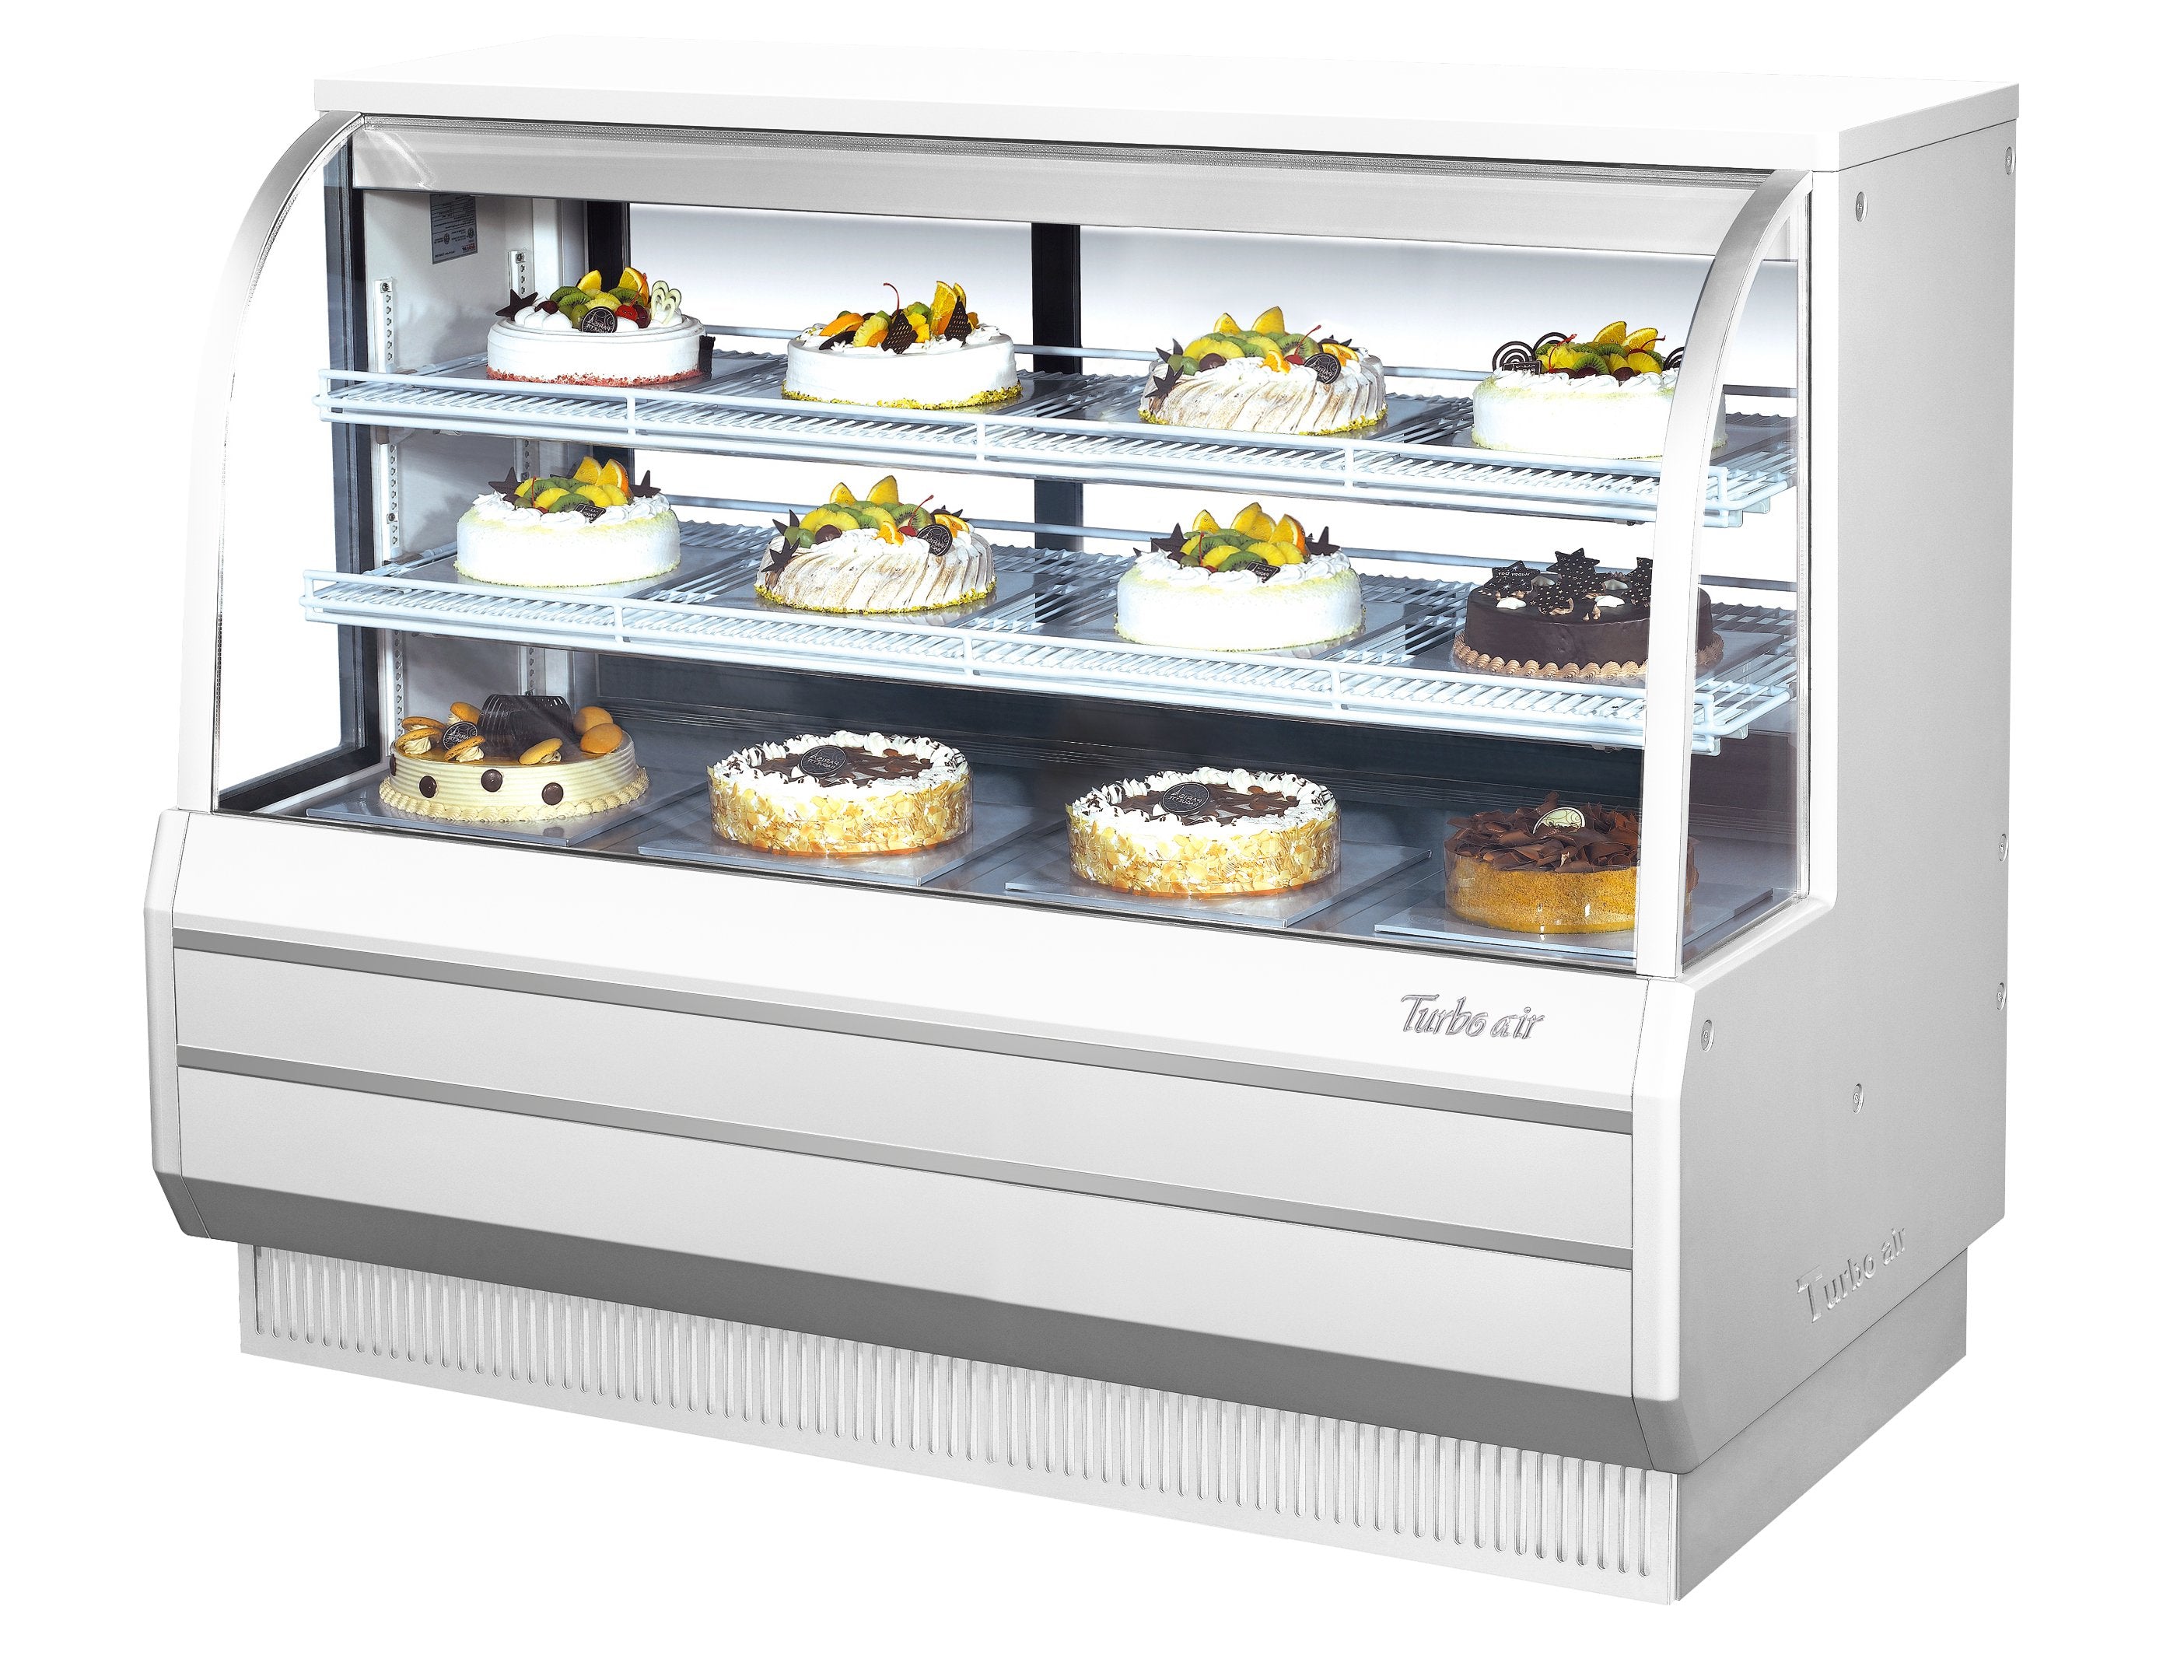 Turbo Air TCGB-60-W-N 5' Bakery Case-Refrigerated - White